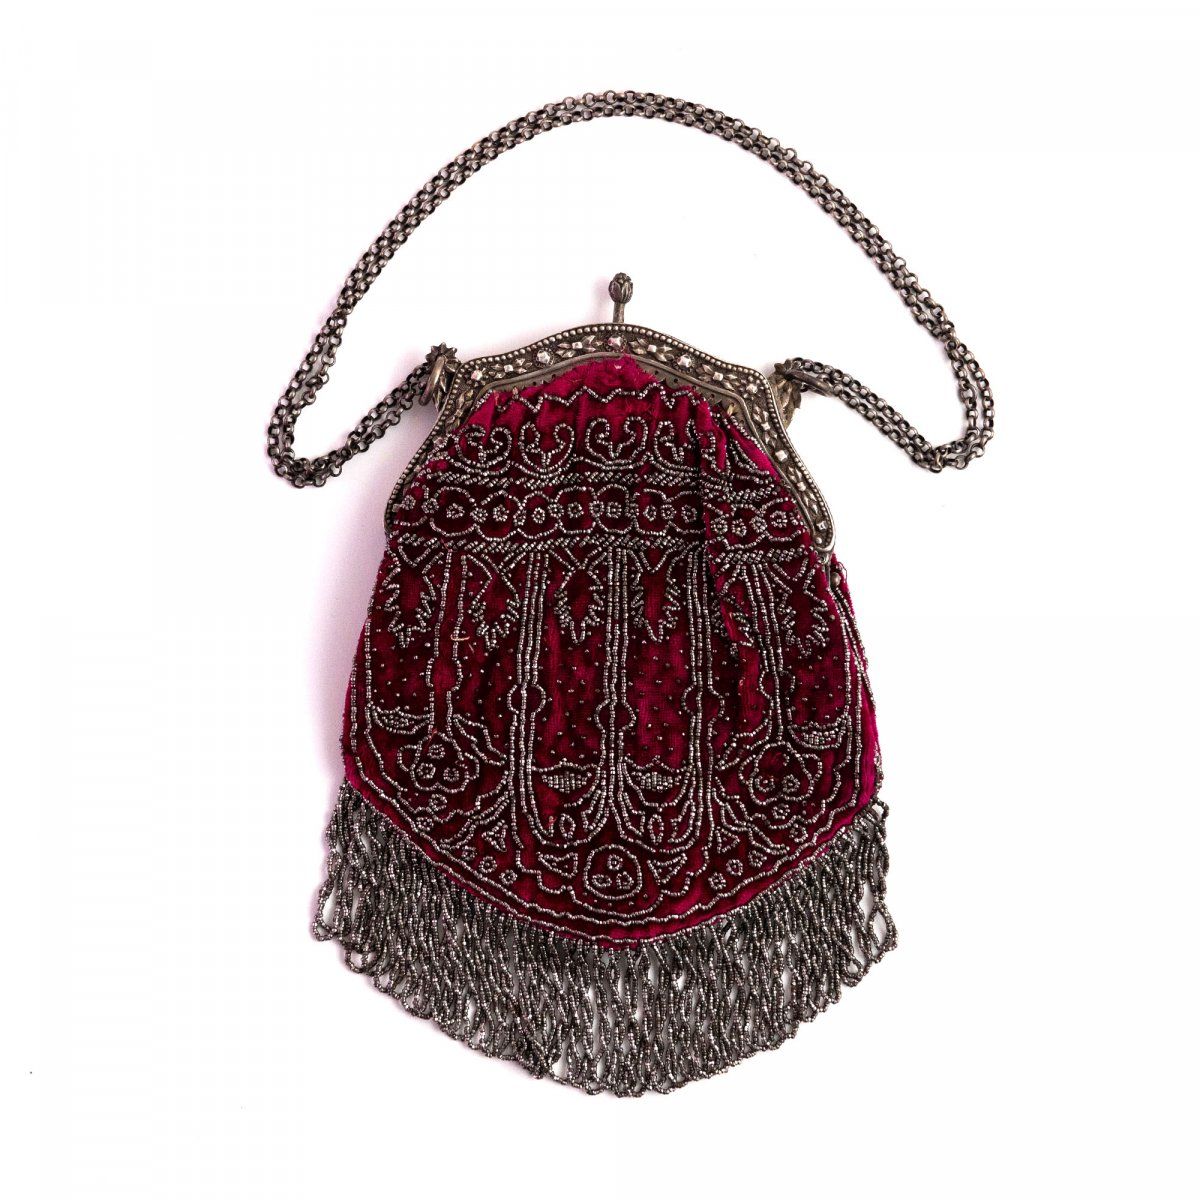 Null Cut steel bag, c. 1900, H. 20 x 15 cm. Embroidered steel beads on red velve&hellip;